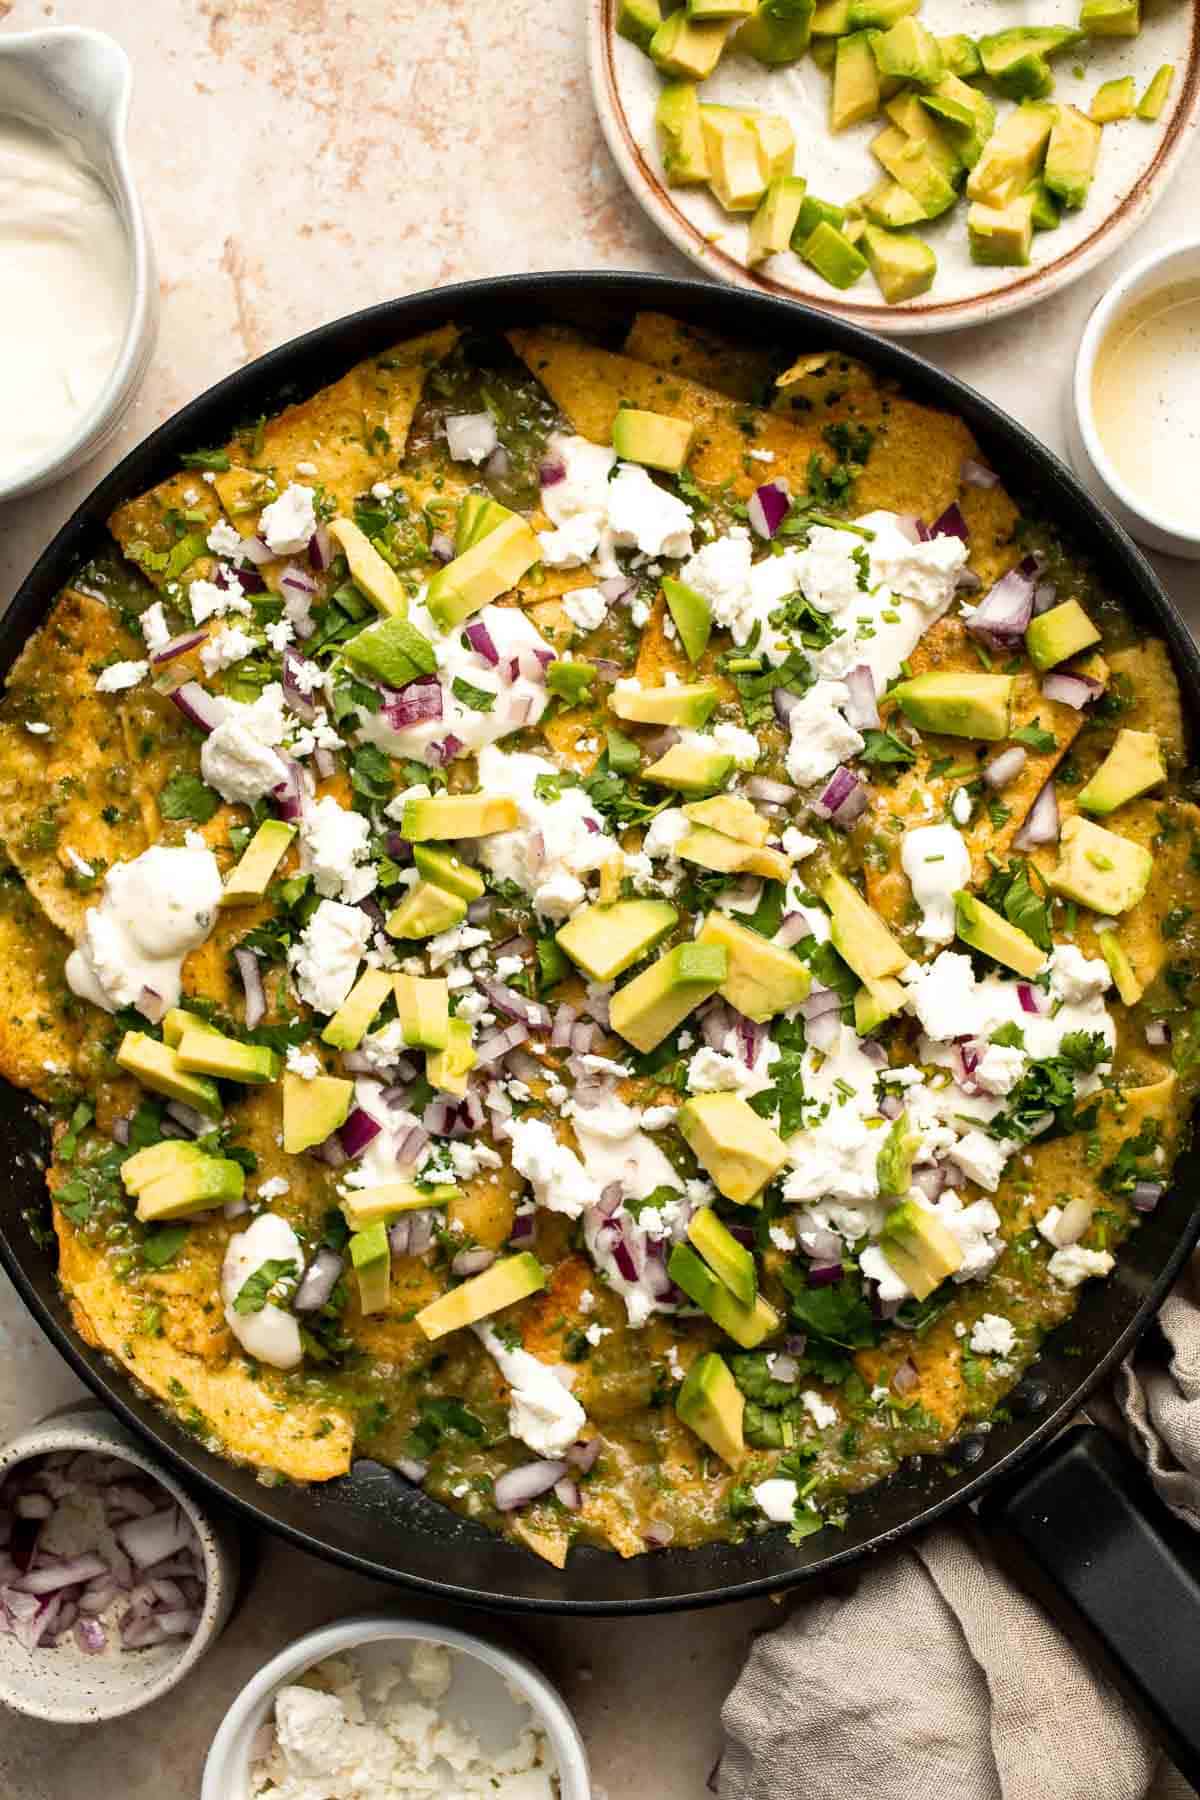 Chilaquiles Verdes feature crispy baked tortilla chips smothered in a homemade sauce loaded with salsa verde and features classic Mexican toppings. | aheadofthyme.com